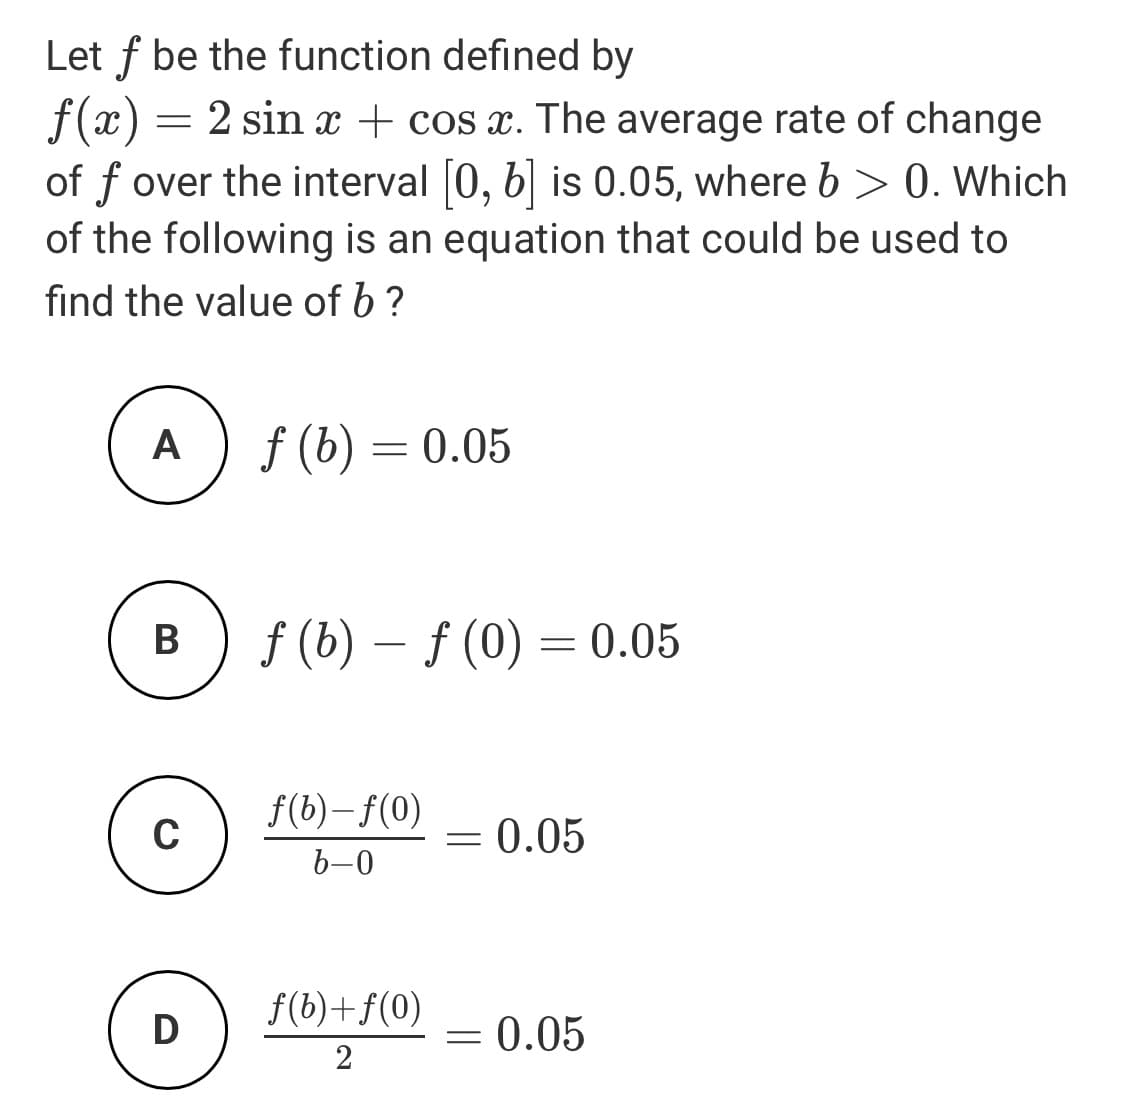 Let f be the function defined by
f(x) = 2 sin x + cos x. The average rate of change
of f over the interval 0, b| is 0.05, where b > 0. Which
of the following is an equation that could be used to
find the value of b?
A
f (b) = 0.05
В
f (b) – f (0) = 0.05
-
f(b)–f(0)
0.05
b-0
f(b)+f(0)
D
0.05
2
